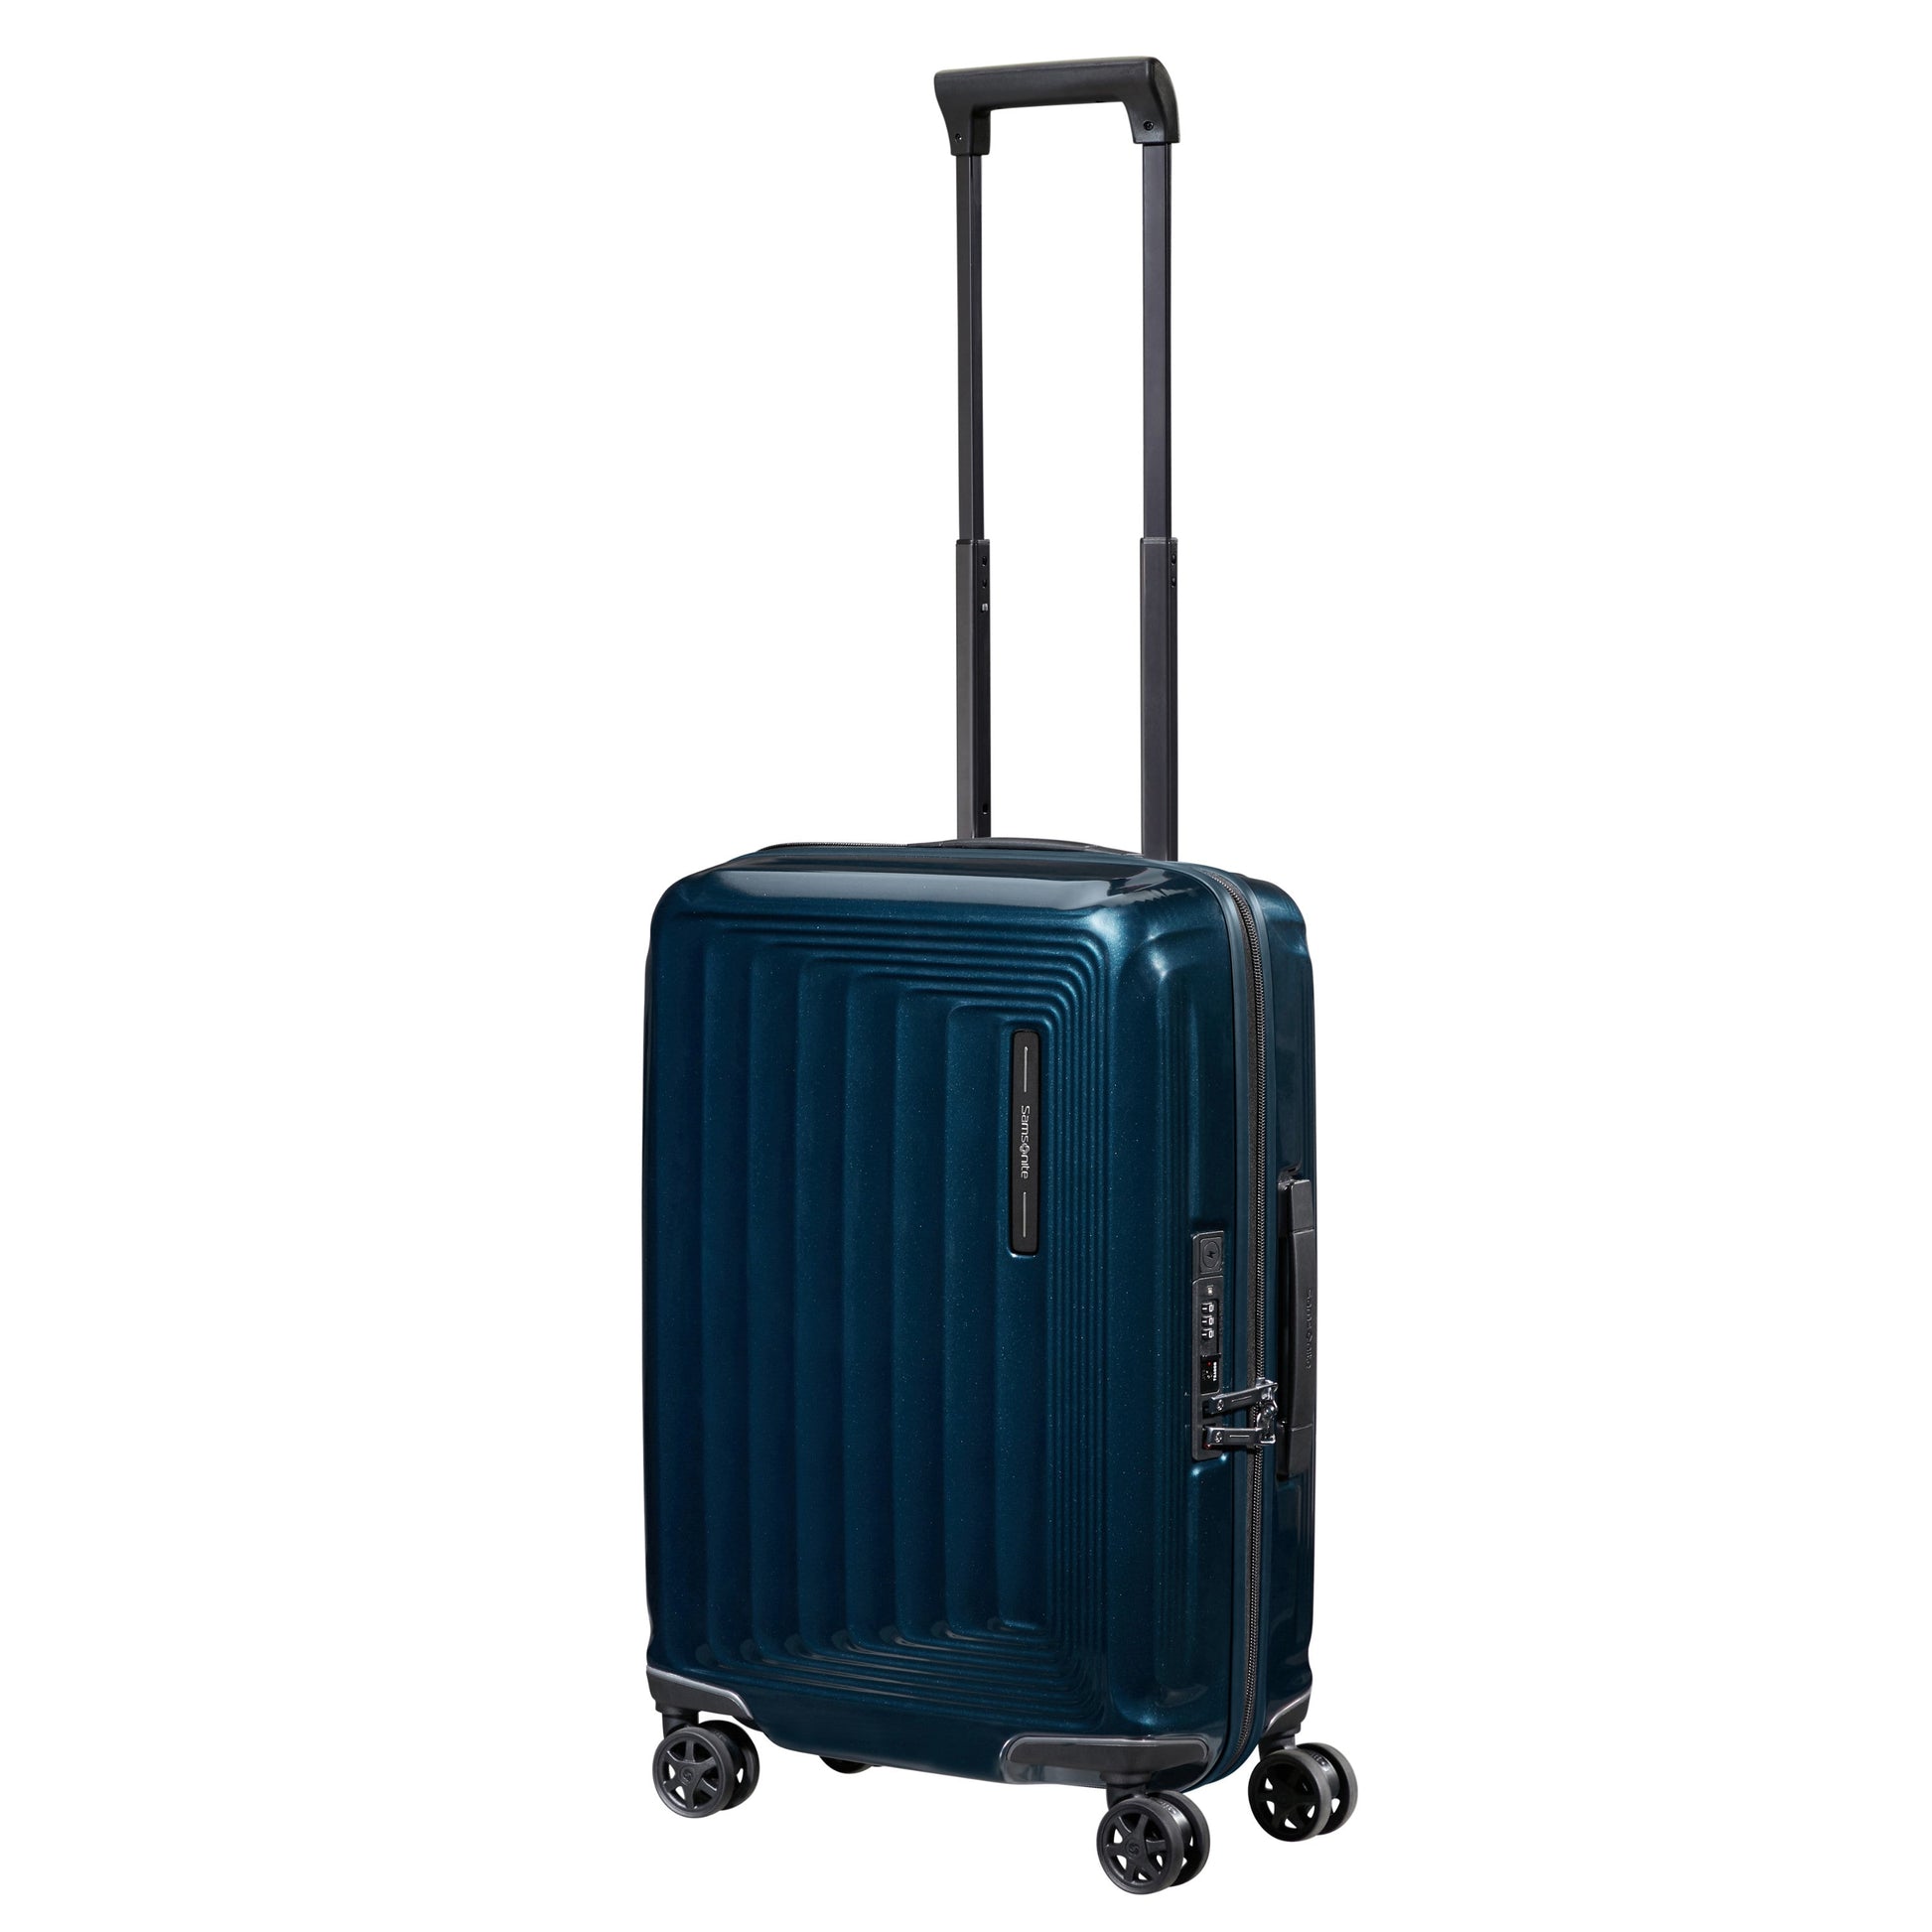 Samsonite Nuon Expandable Carry On Luggage